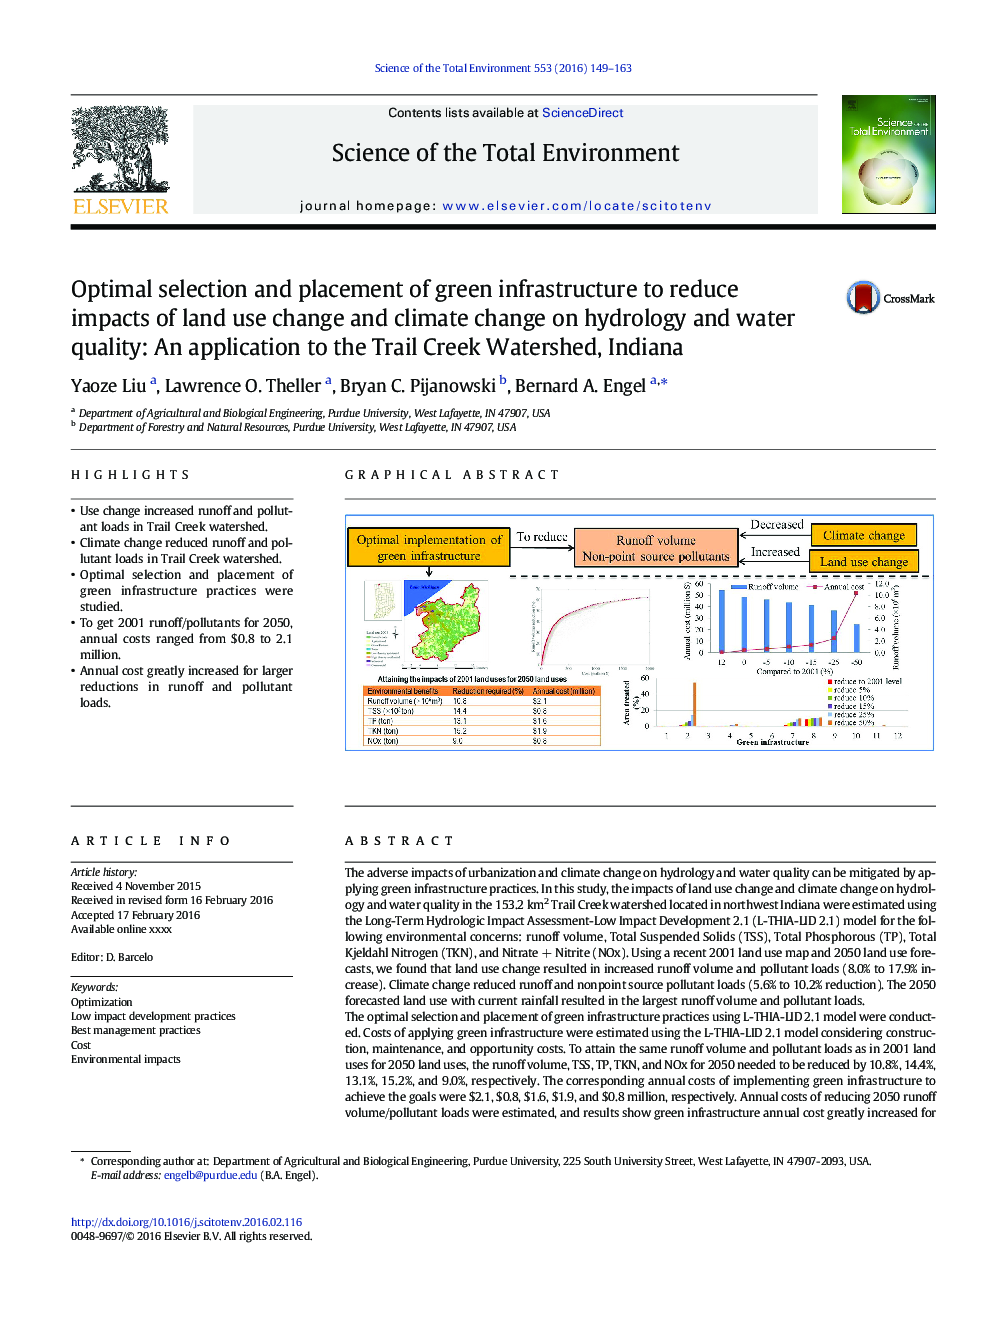 Optimal selection and placement of green infrastructure to reduce impacts of land use change and climate change on hydrology and water quality: An application to the Trail Creek Watershed, Indiana